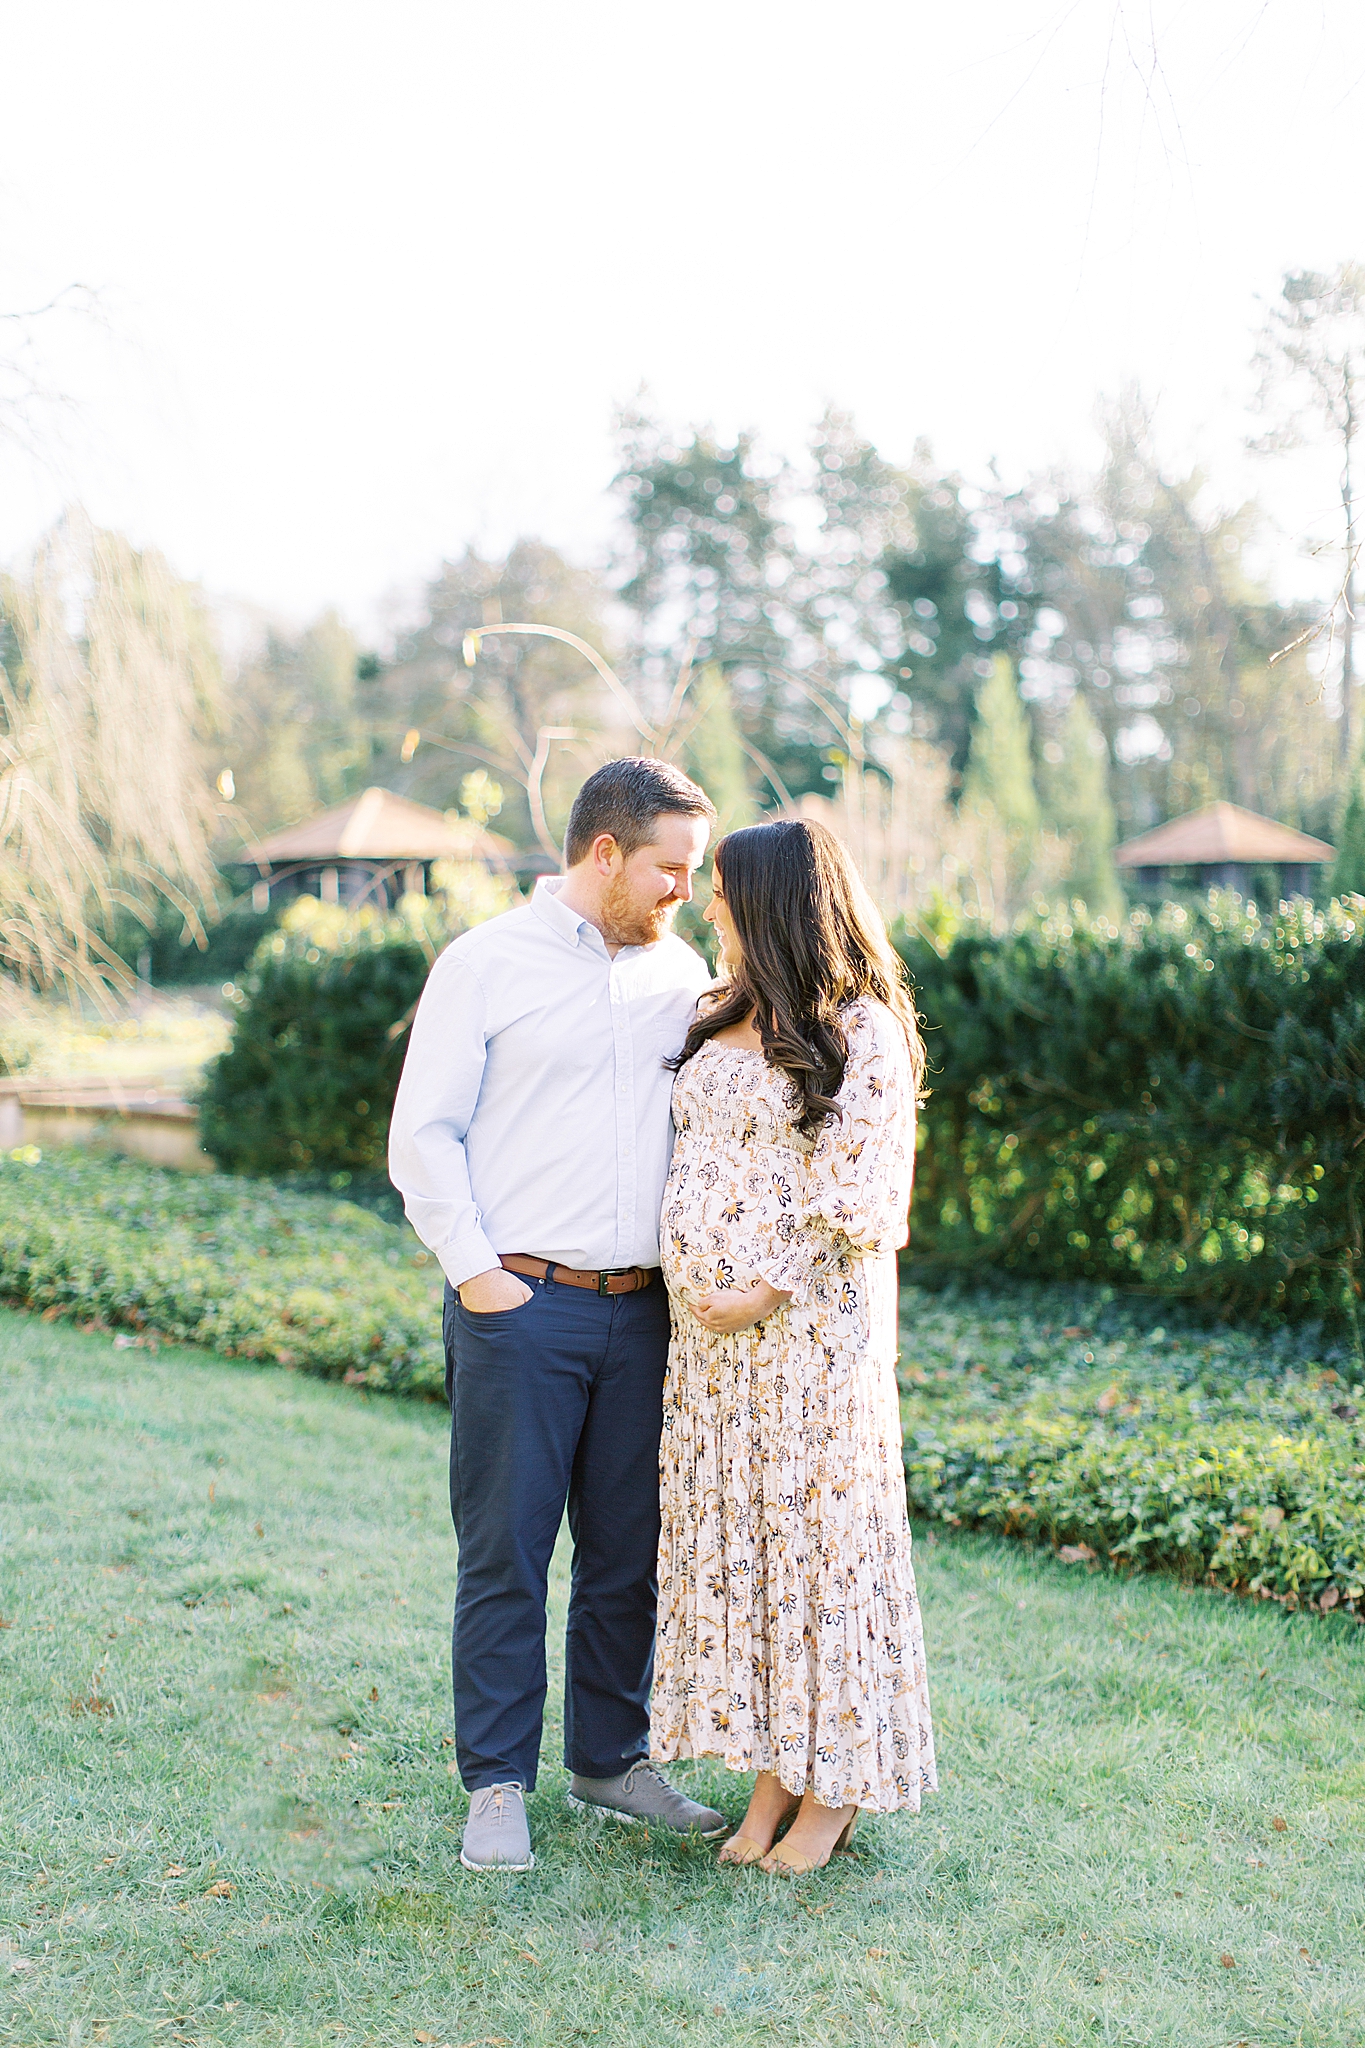 Reynolda Village maternity session for young couple